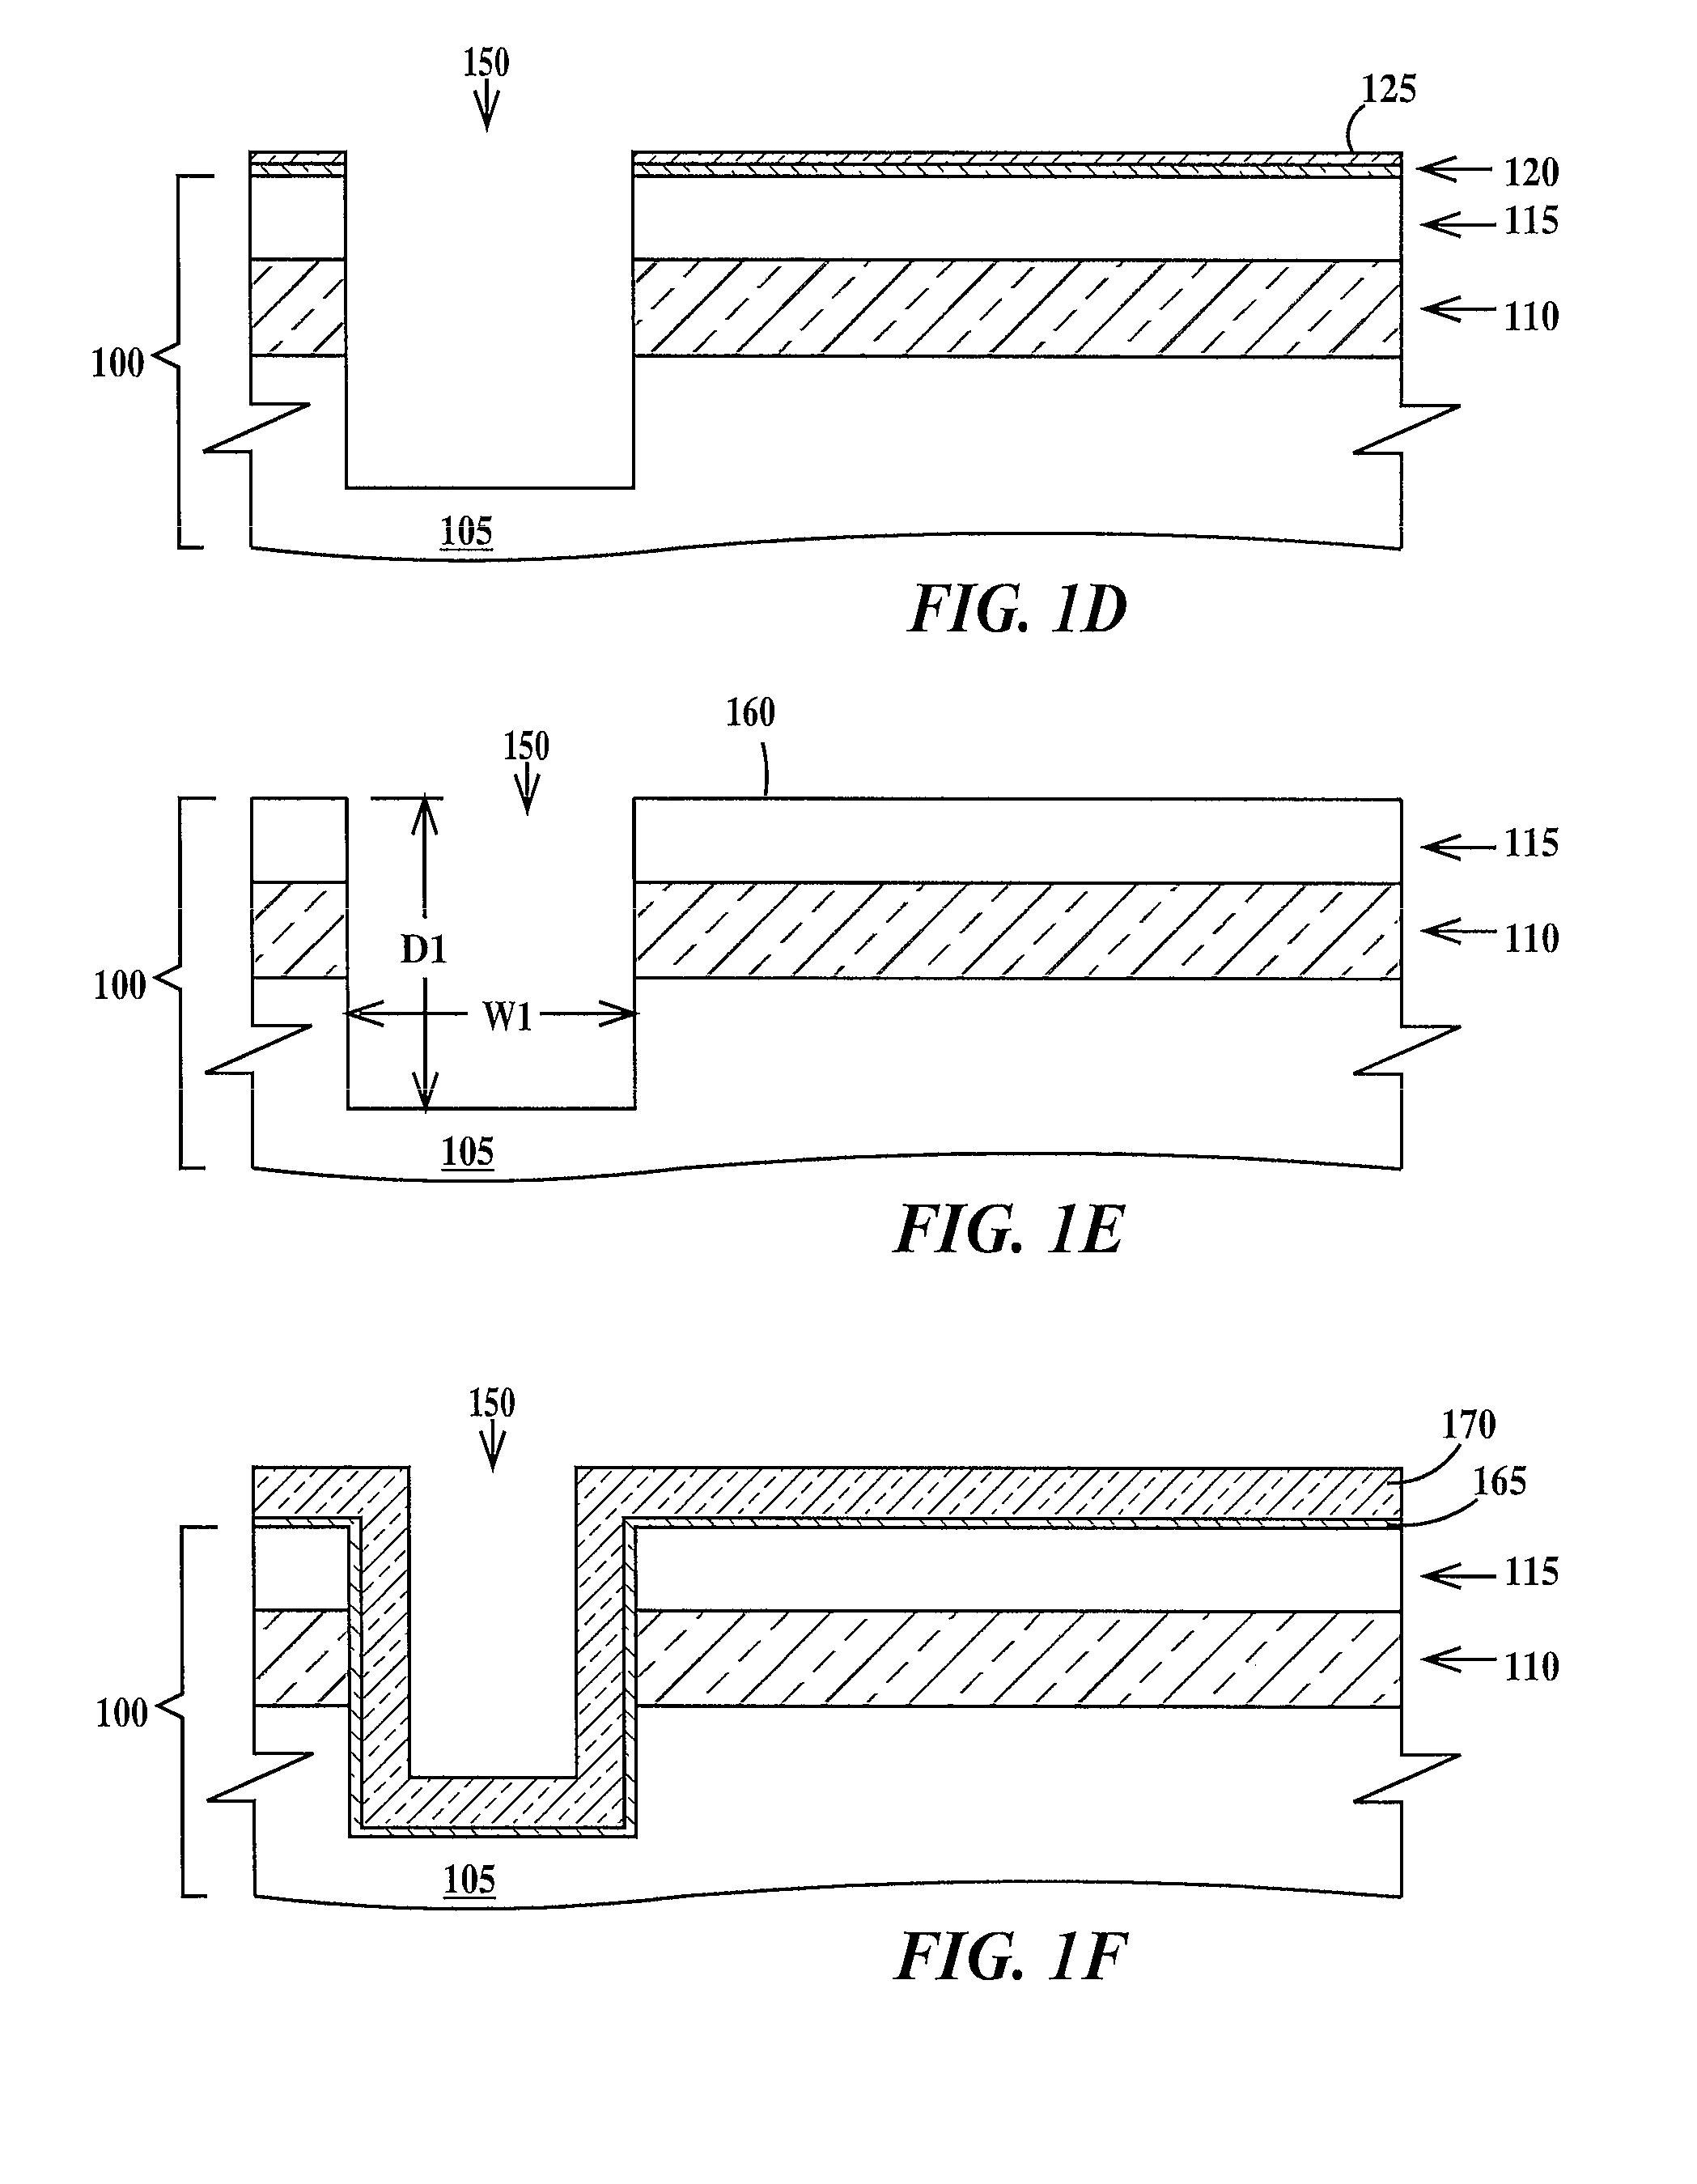 High-z structure and method for co-alignment of mixed optical and electron beam lithographic fabrication levels